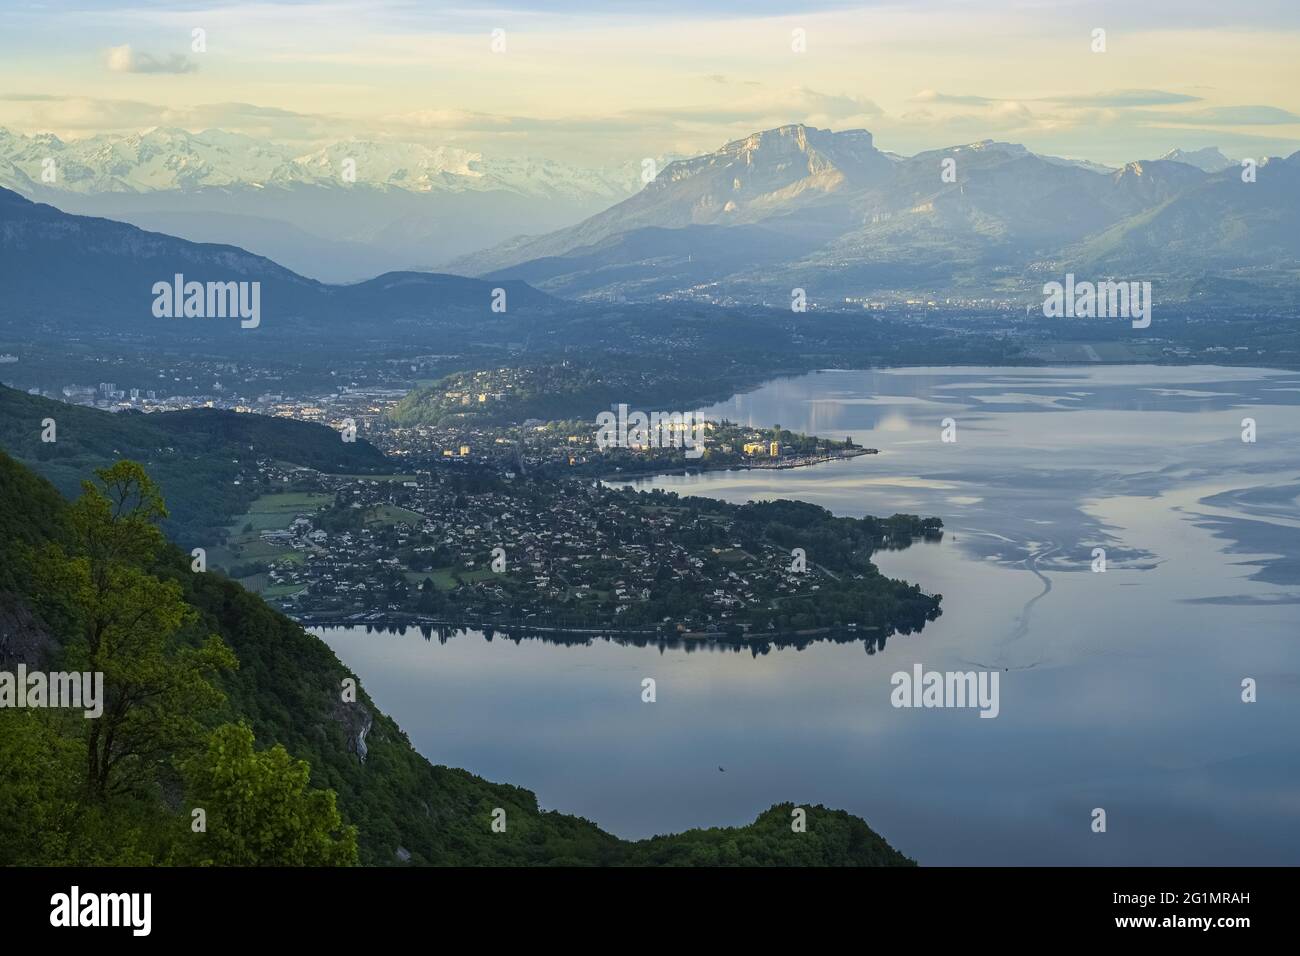 France, Savoie, Aix-les-Bains on the banks of the Bourget Lake, Mont Granier (alt : 1933m) in the Chartreuse massif and the snowy Belledonne massif in the background Stock Photo